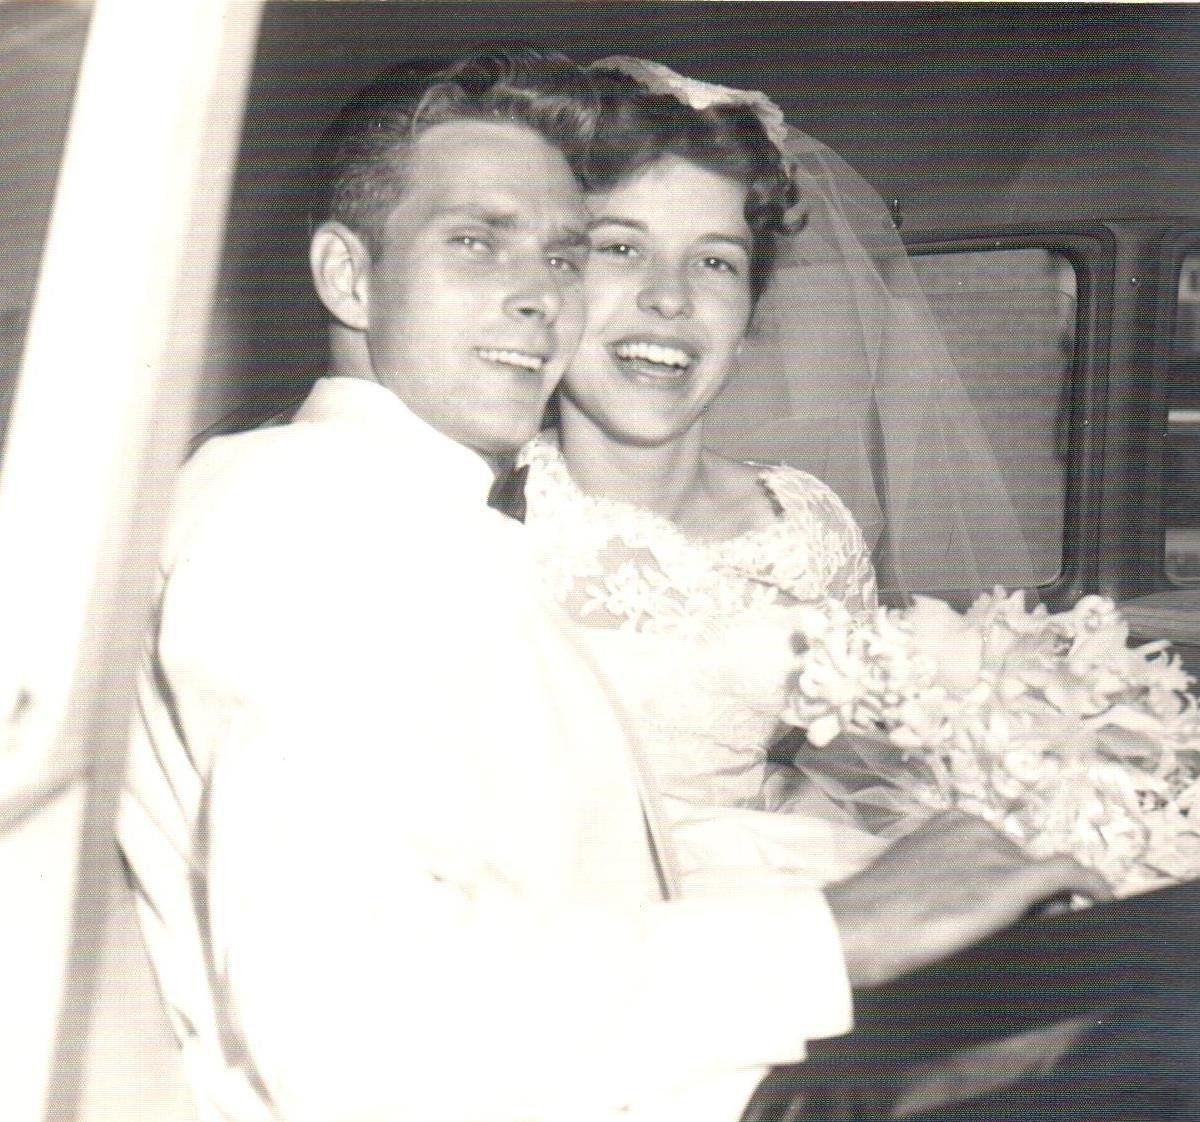 St. Louis-area couple married nearly 61 years die on same day from